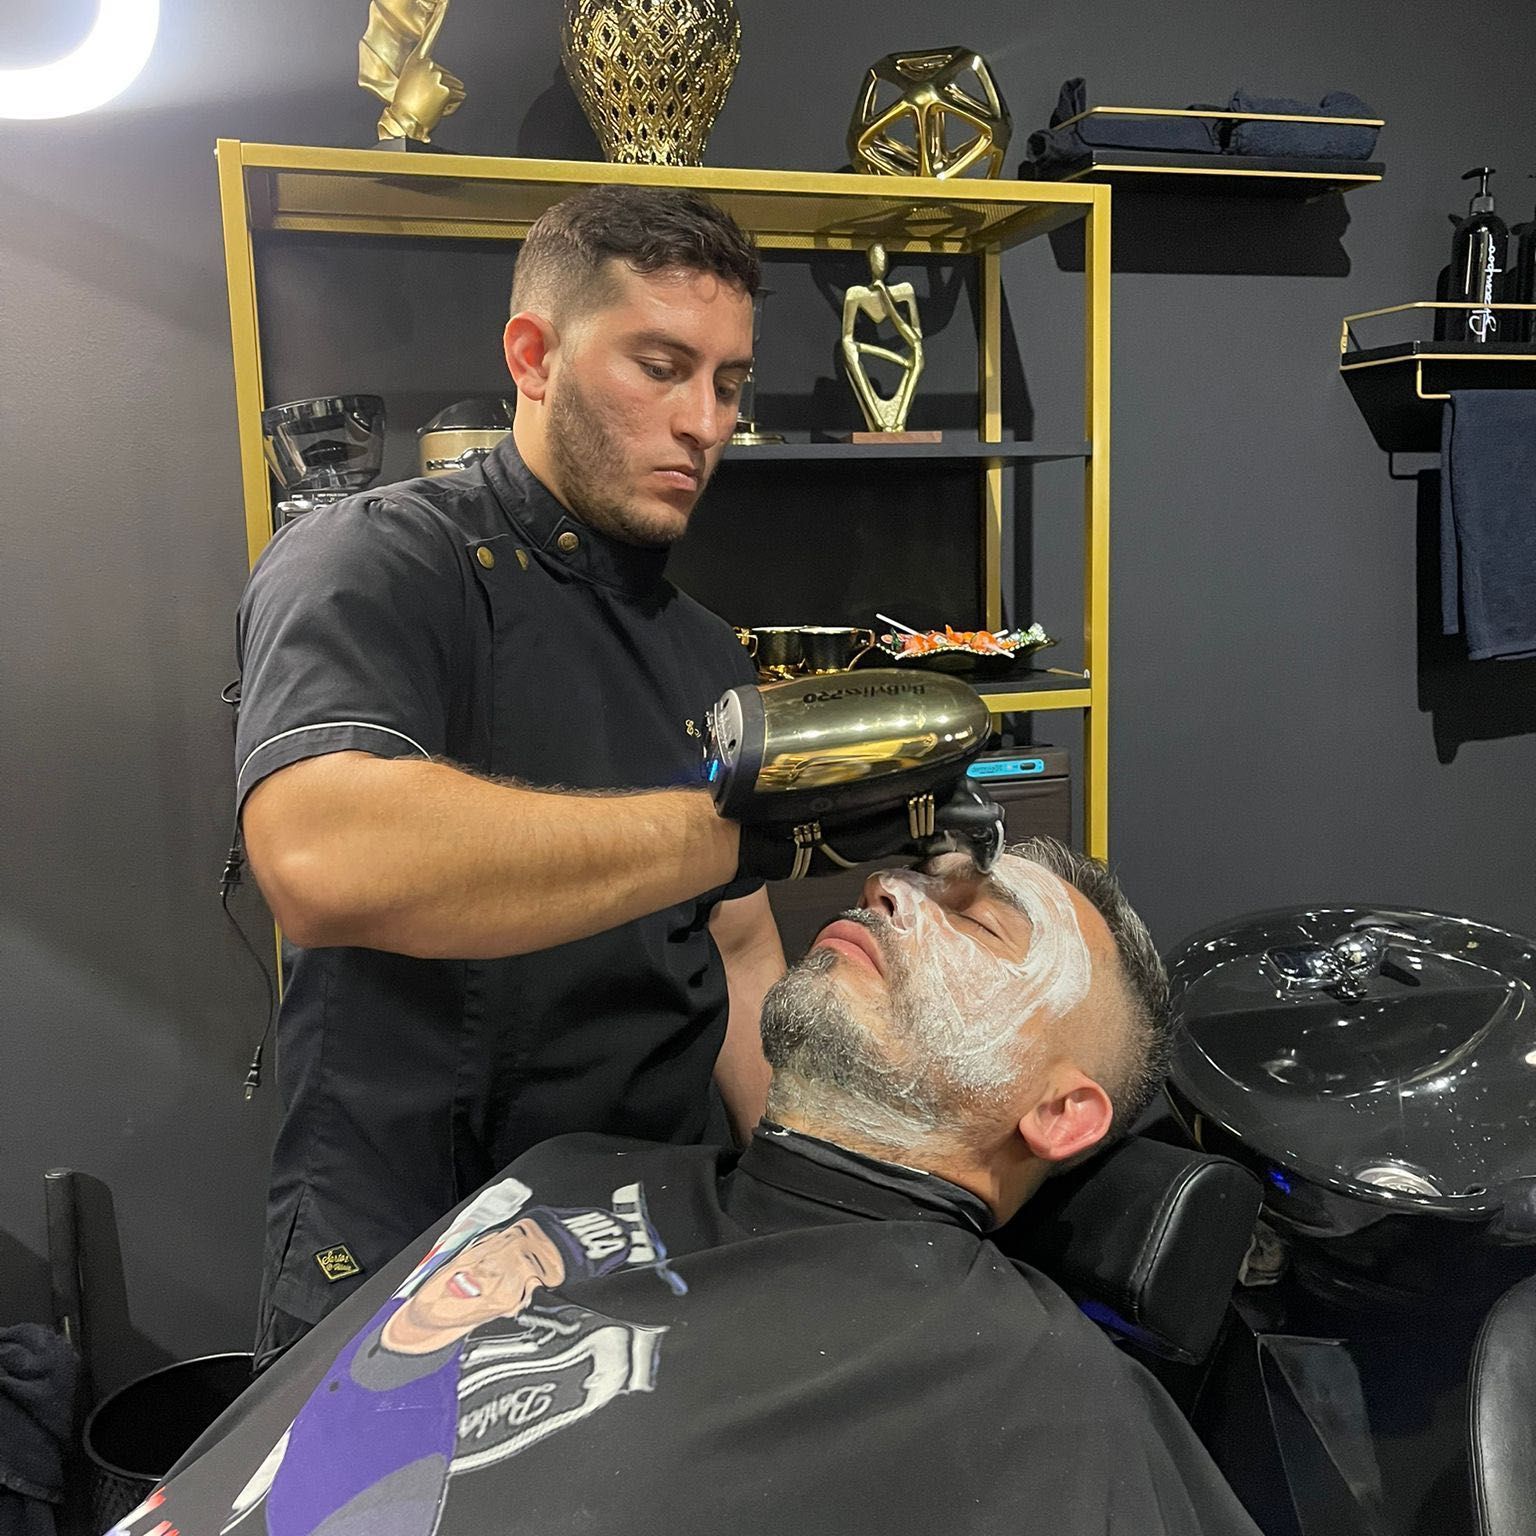 The N1c4 Hot towel shave Experience portfolio